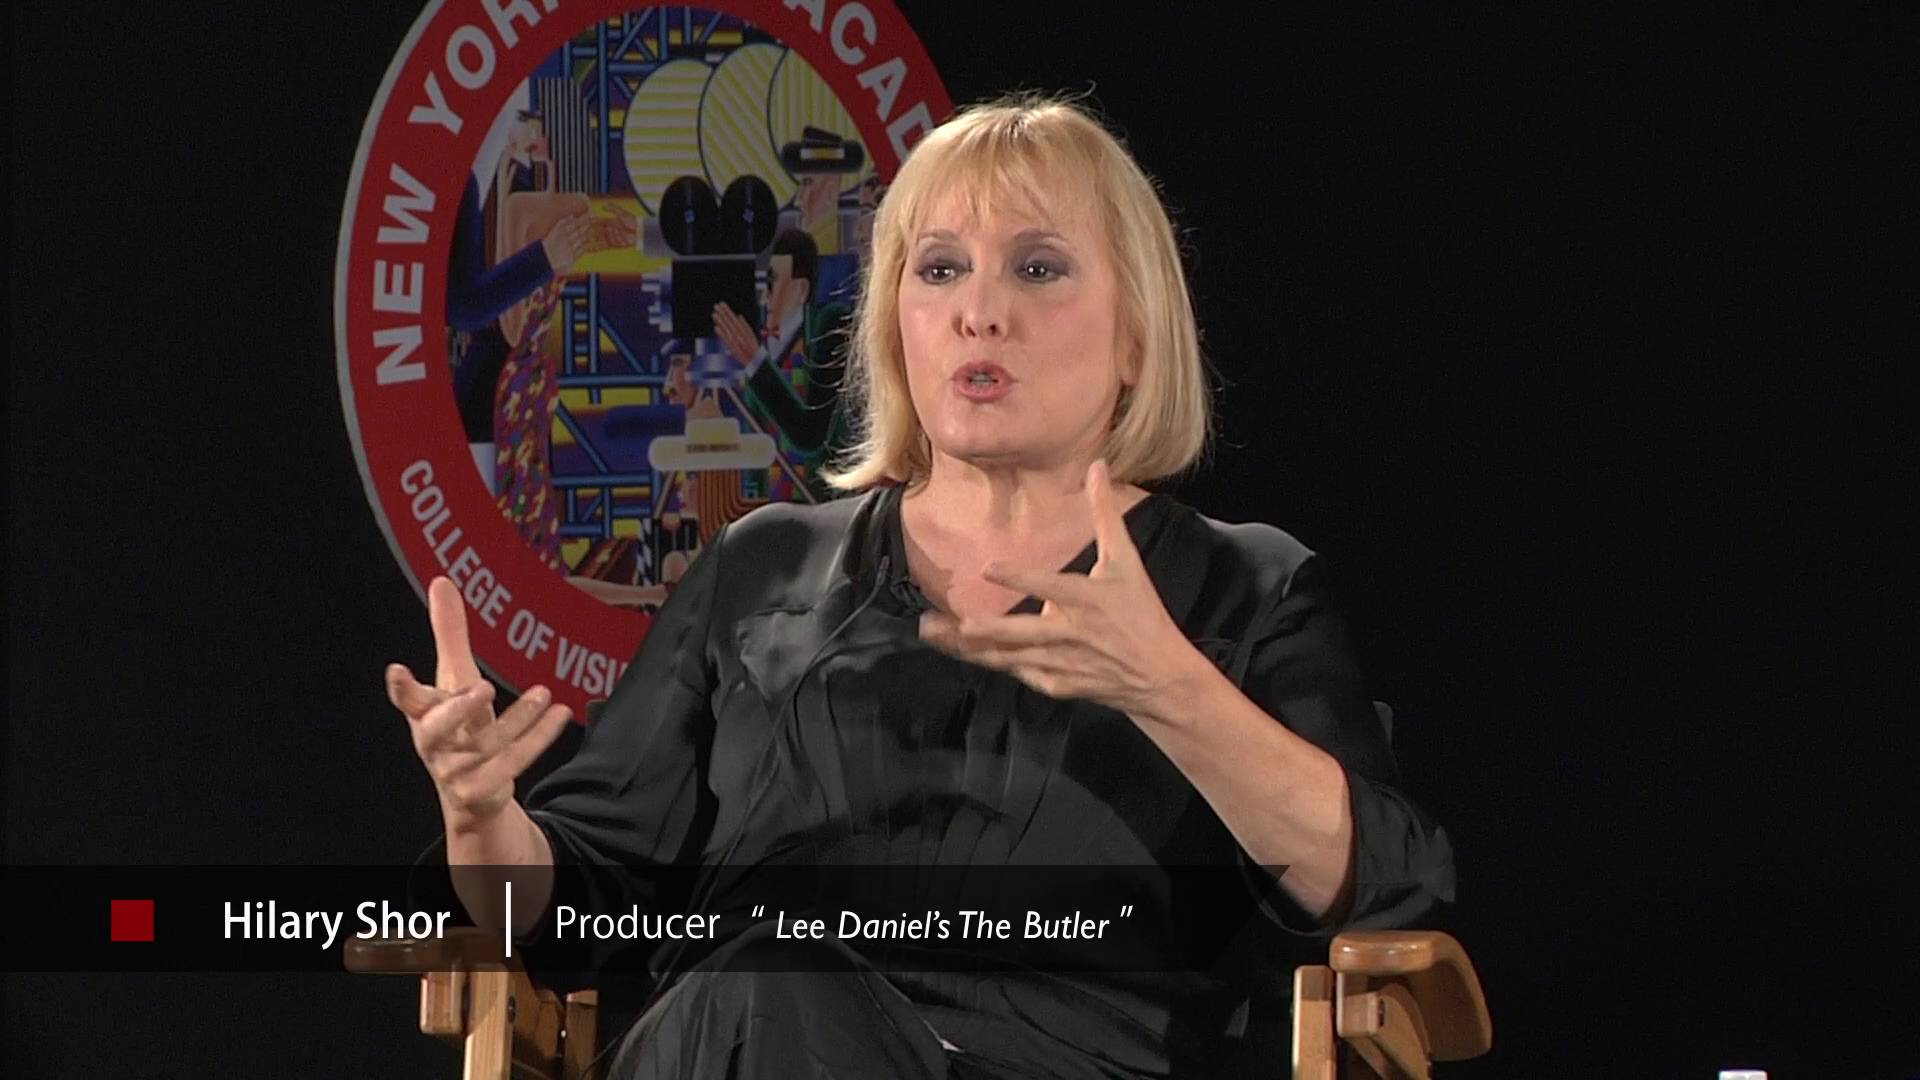 Discussion with Producer Hilary Shor at New York Film Academy